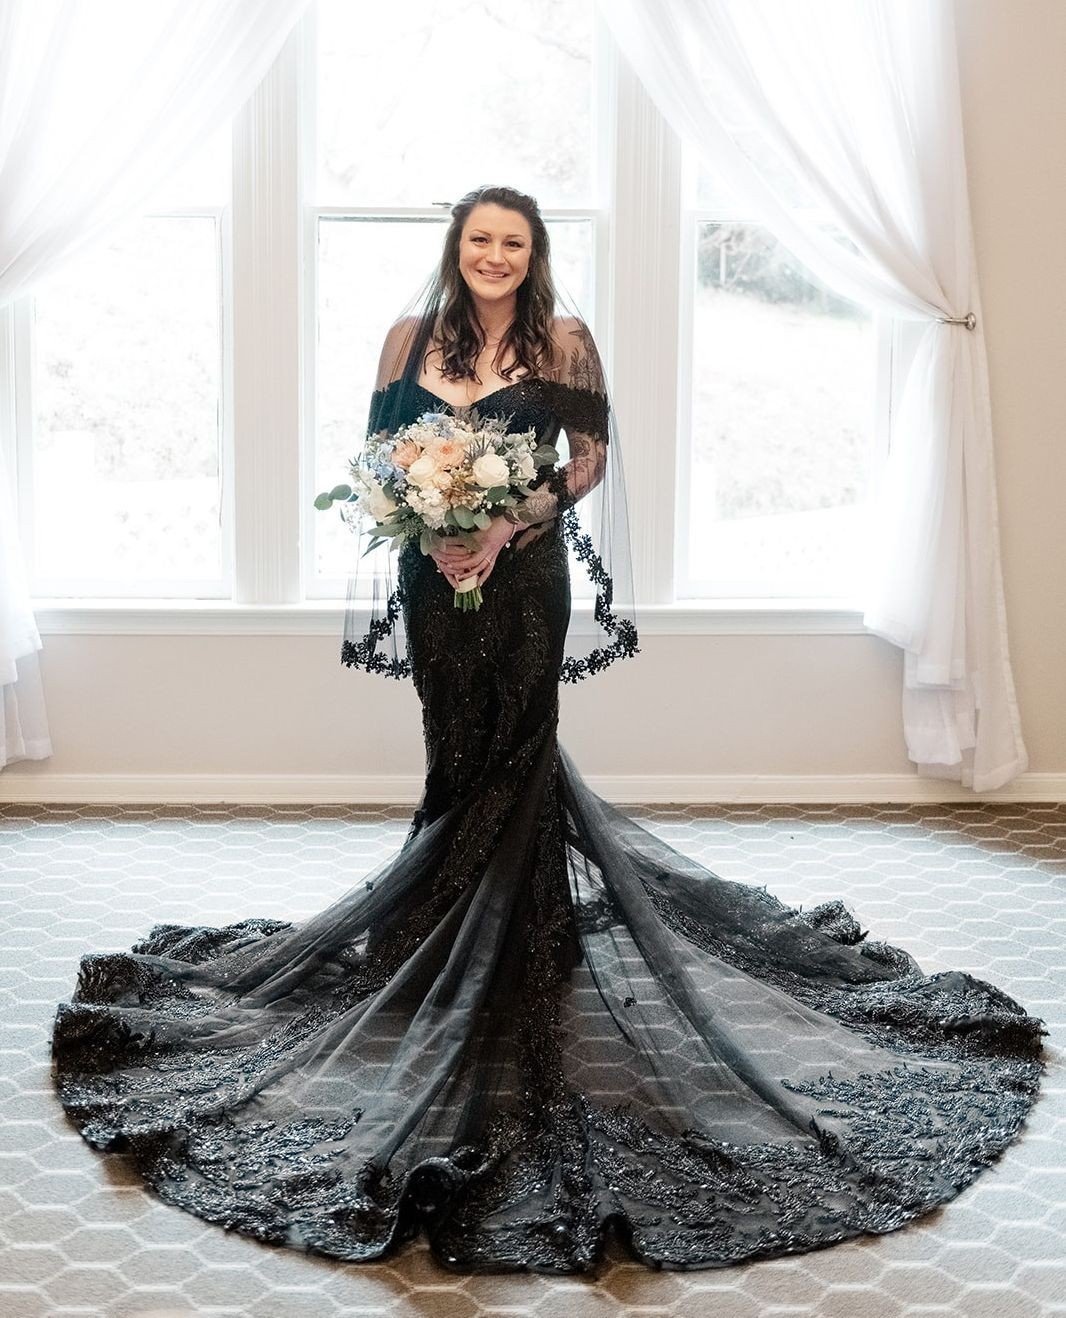 Congratulations to Brittney and Robert on their Stunning Wedding at the Sequoia Mansion. We are so fortunate to make your Custom Elizabeth Lee dress come to life and to make your wedding that much more special! 🖤⁠
⁠
-⁠
⁠
After your wedding day, don'